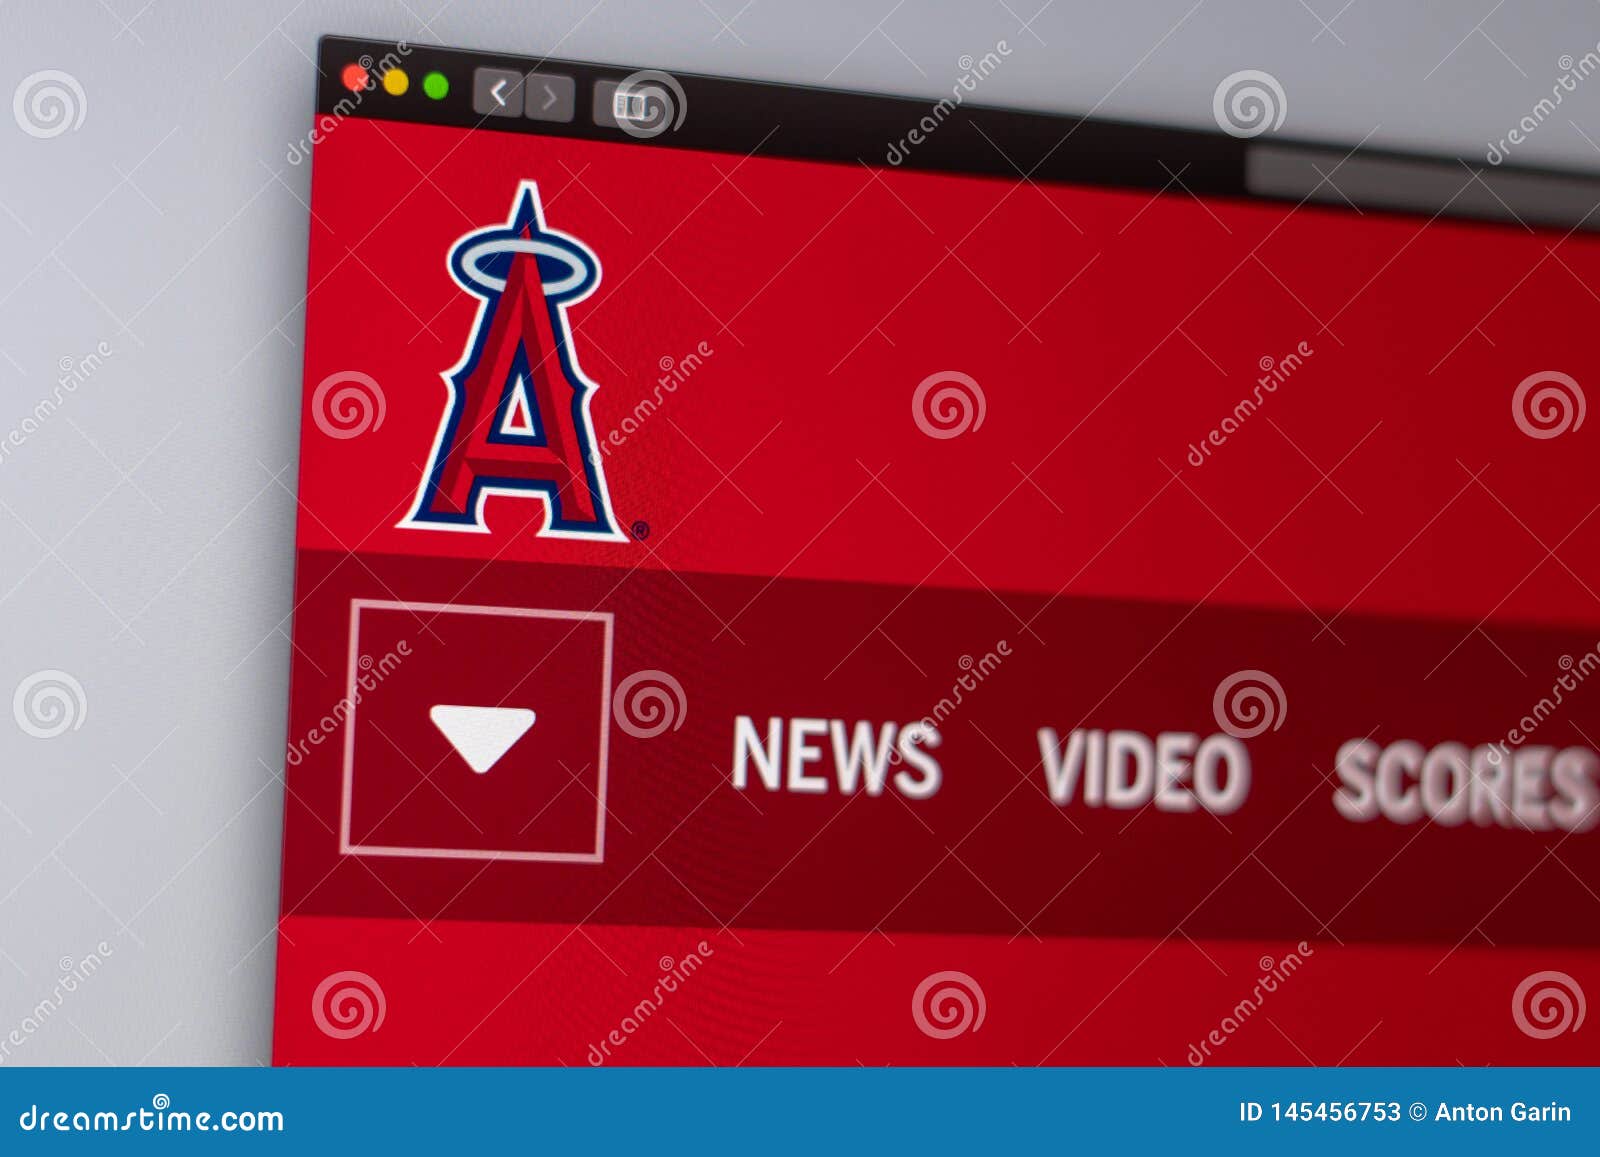 Official Los Angeles Angels Website